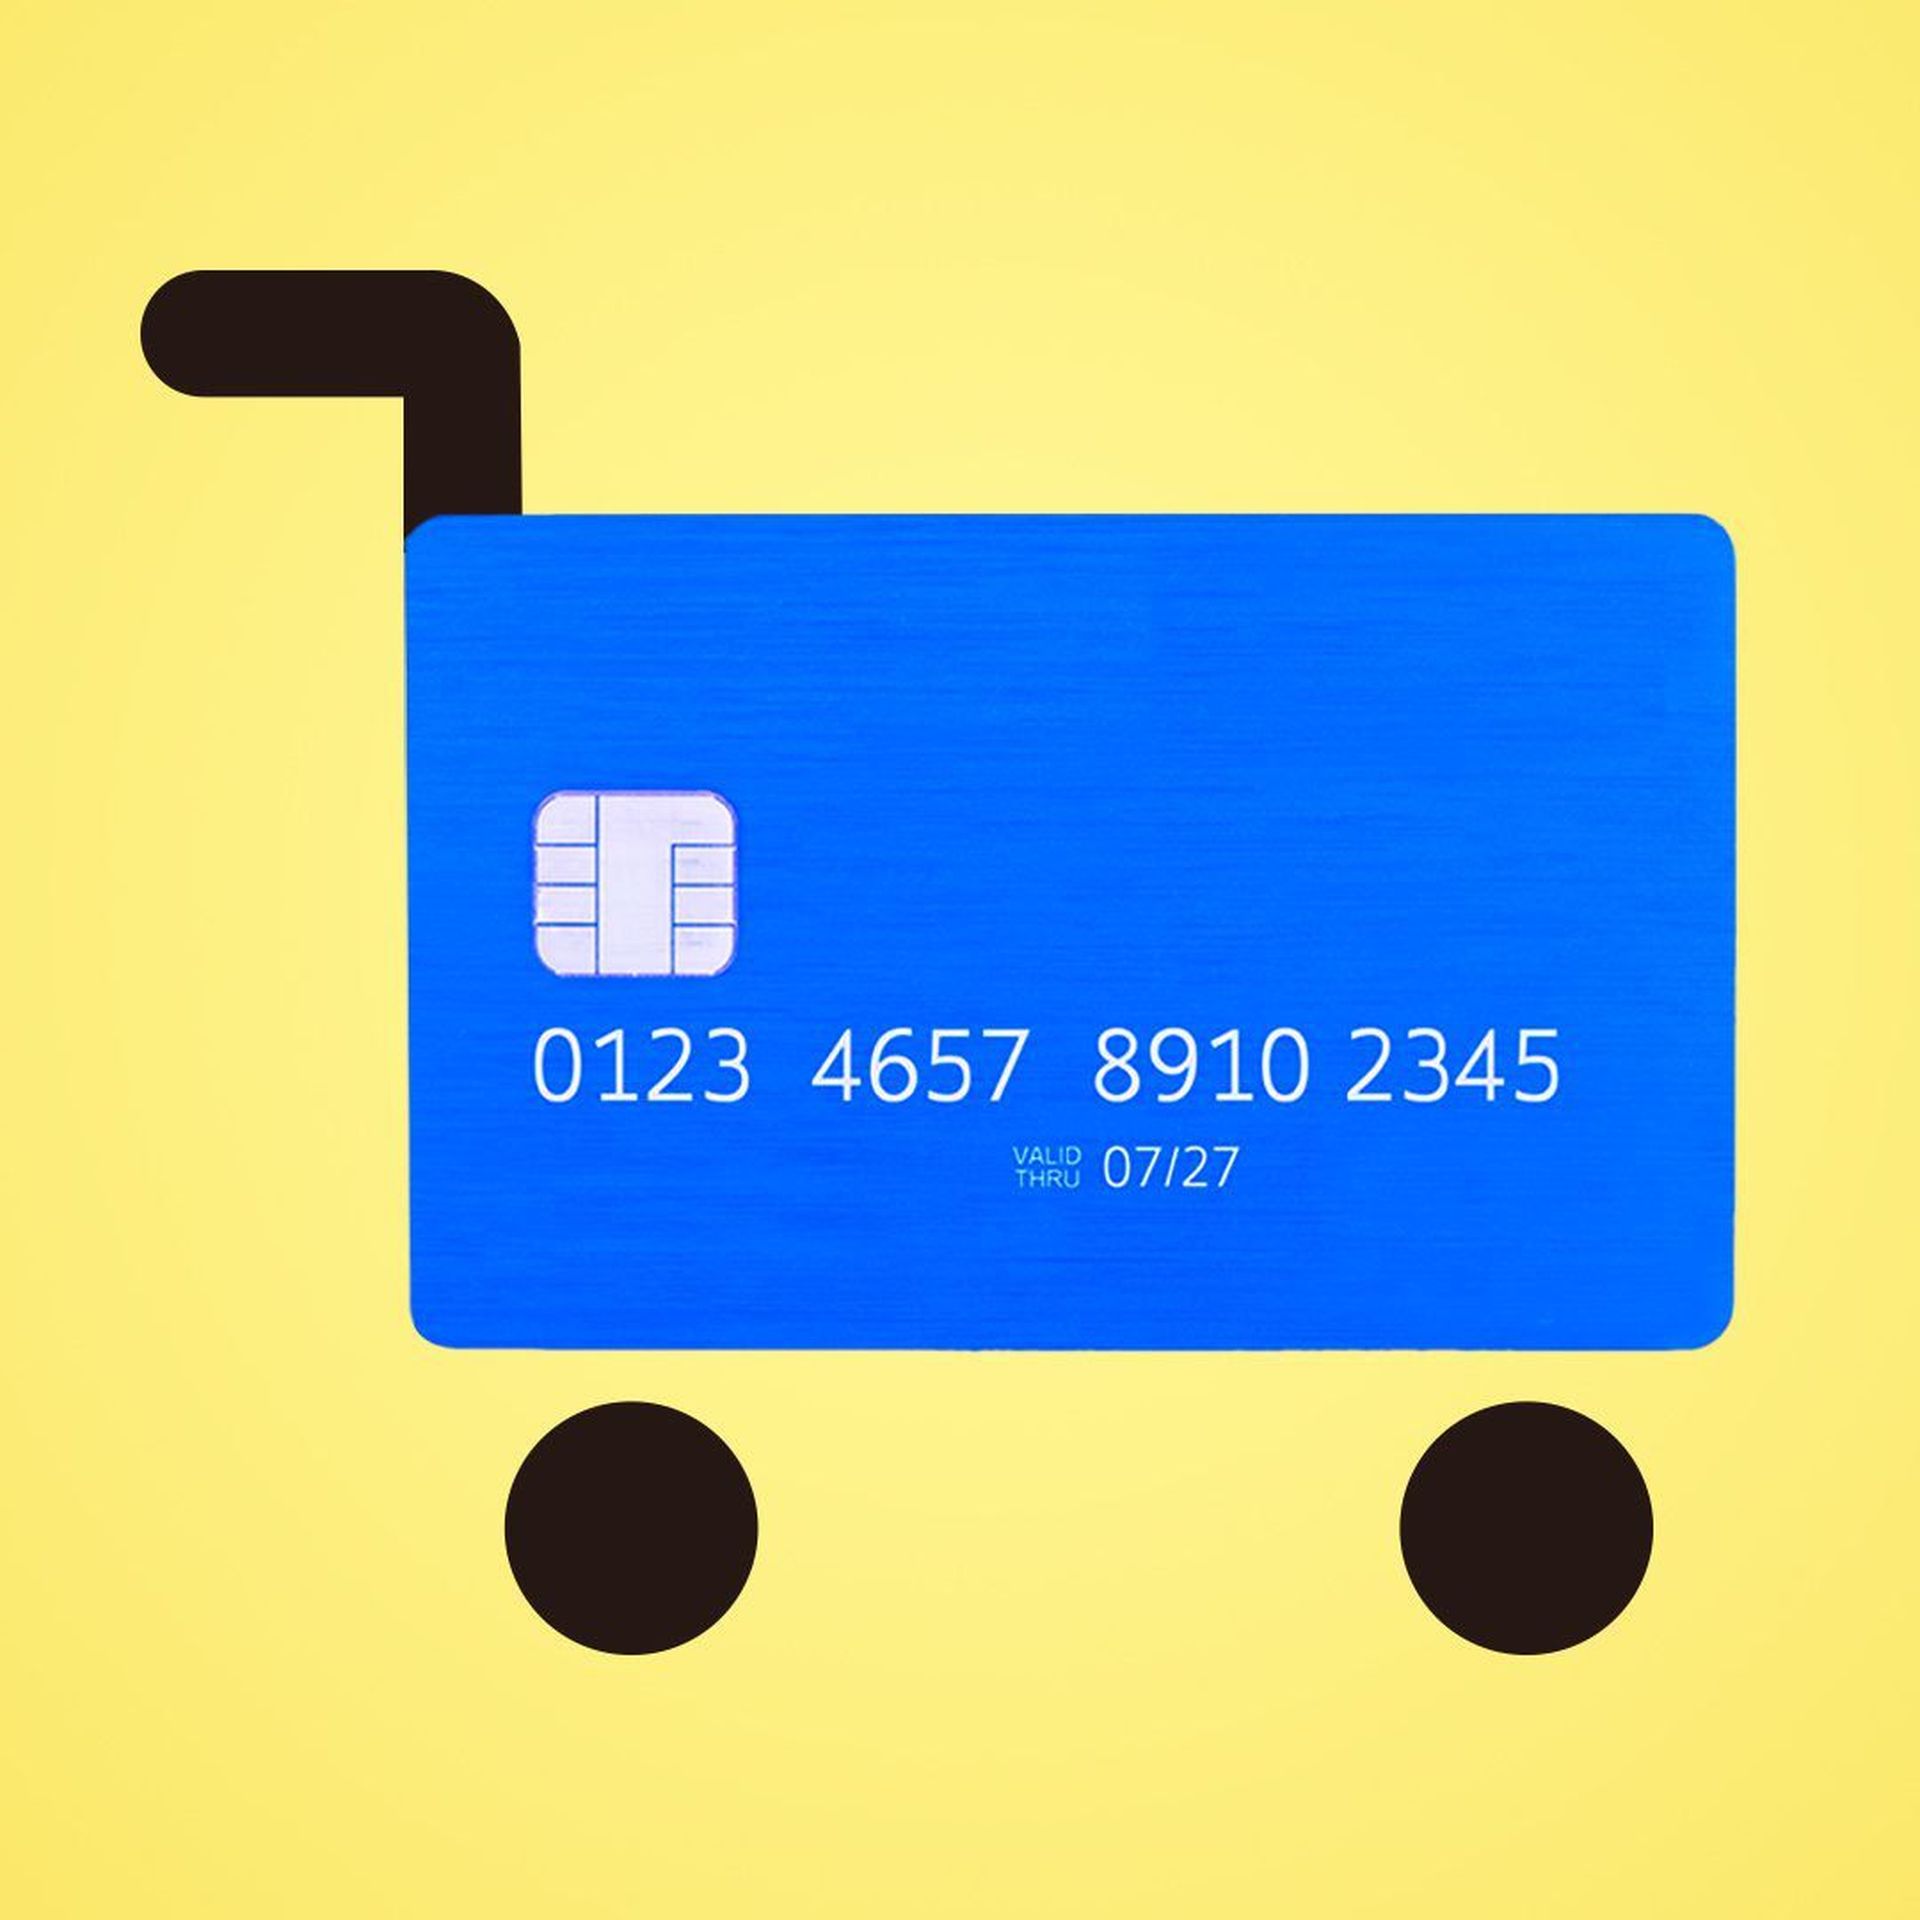 Illustration of a credit card as a shopping cart